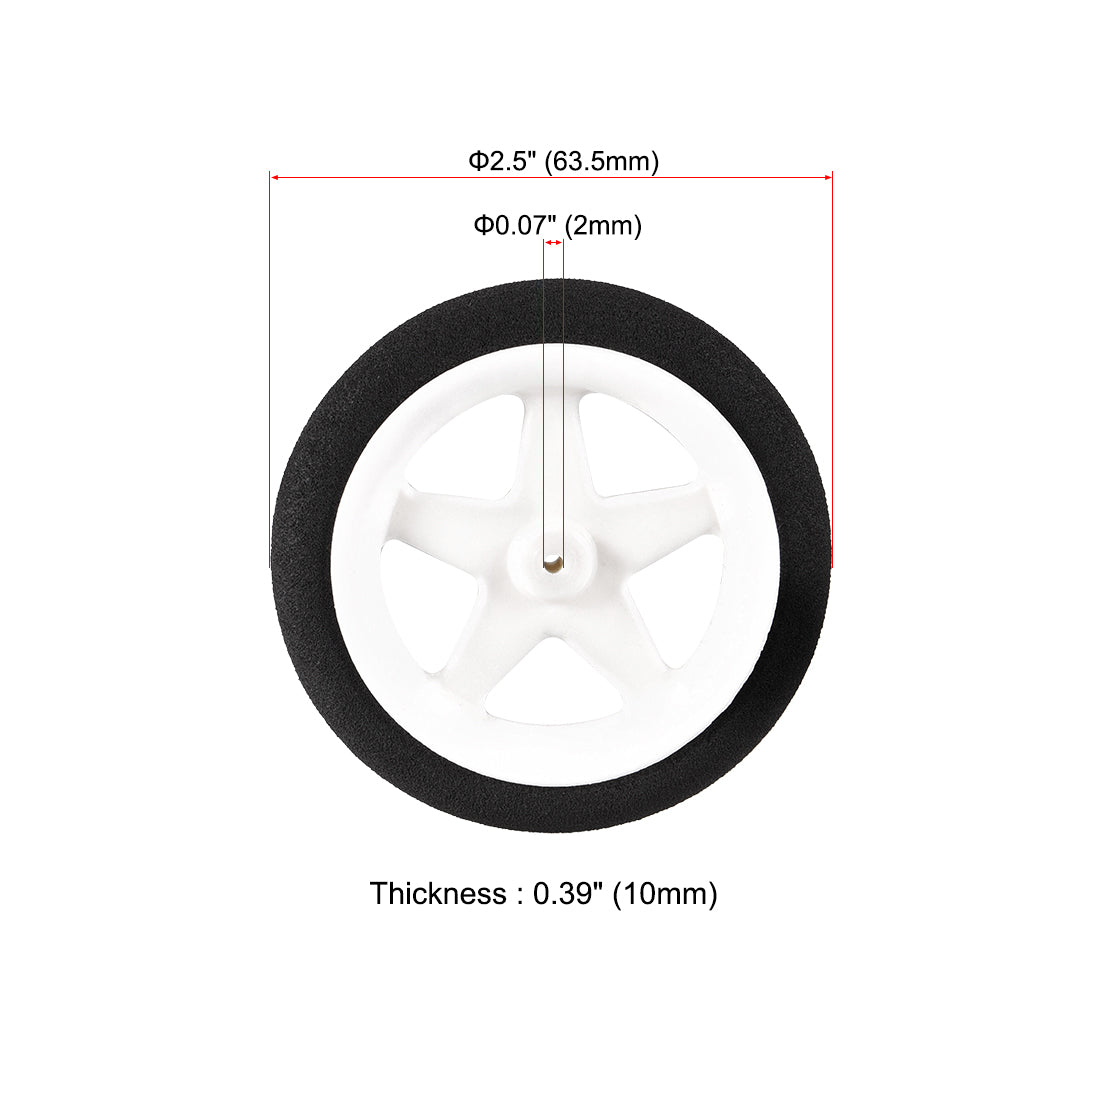 uxcell Uxcell RC Model Plane Aircraft Wheel Micro Sport Wheel 0.07 inch x 2.5 inch -   Wheel 2PCS